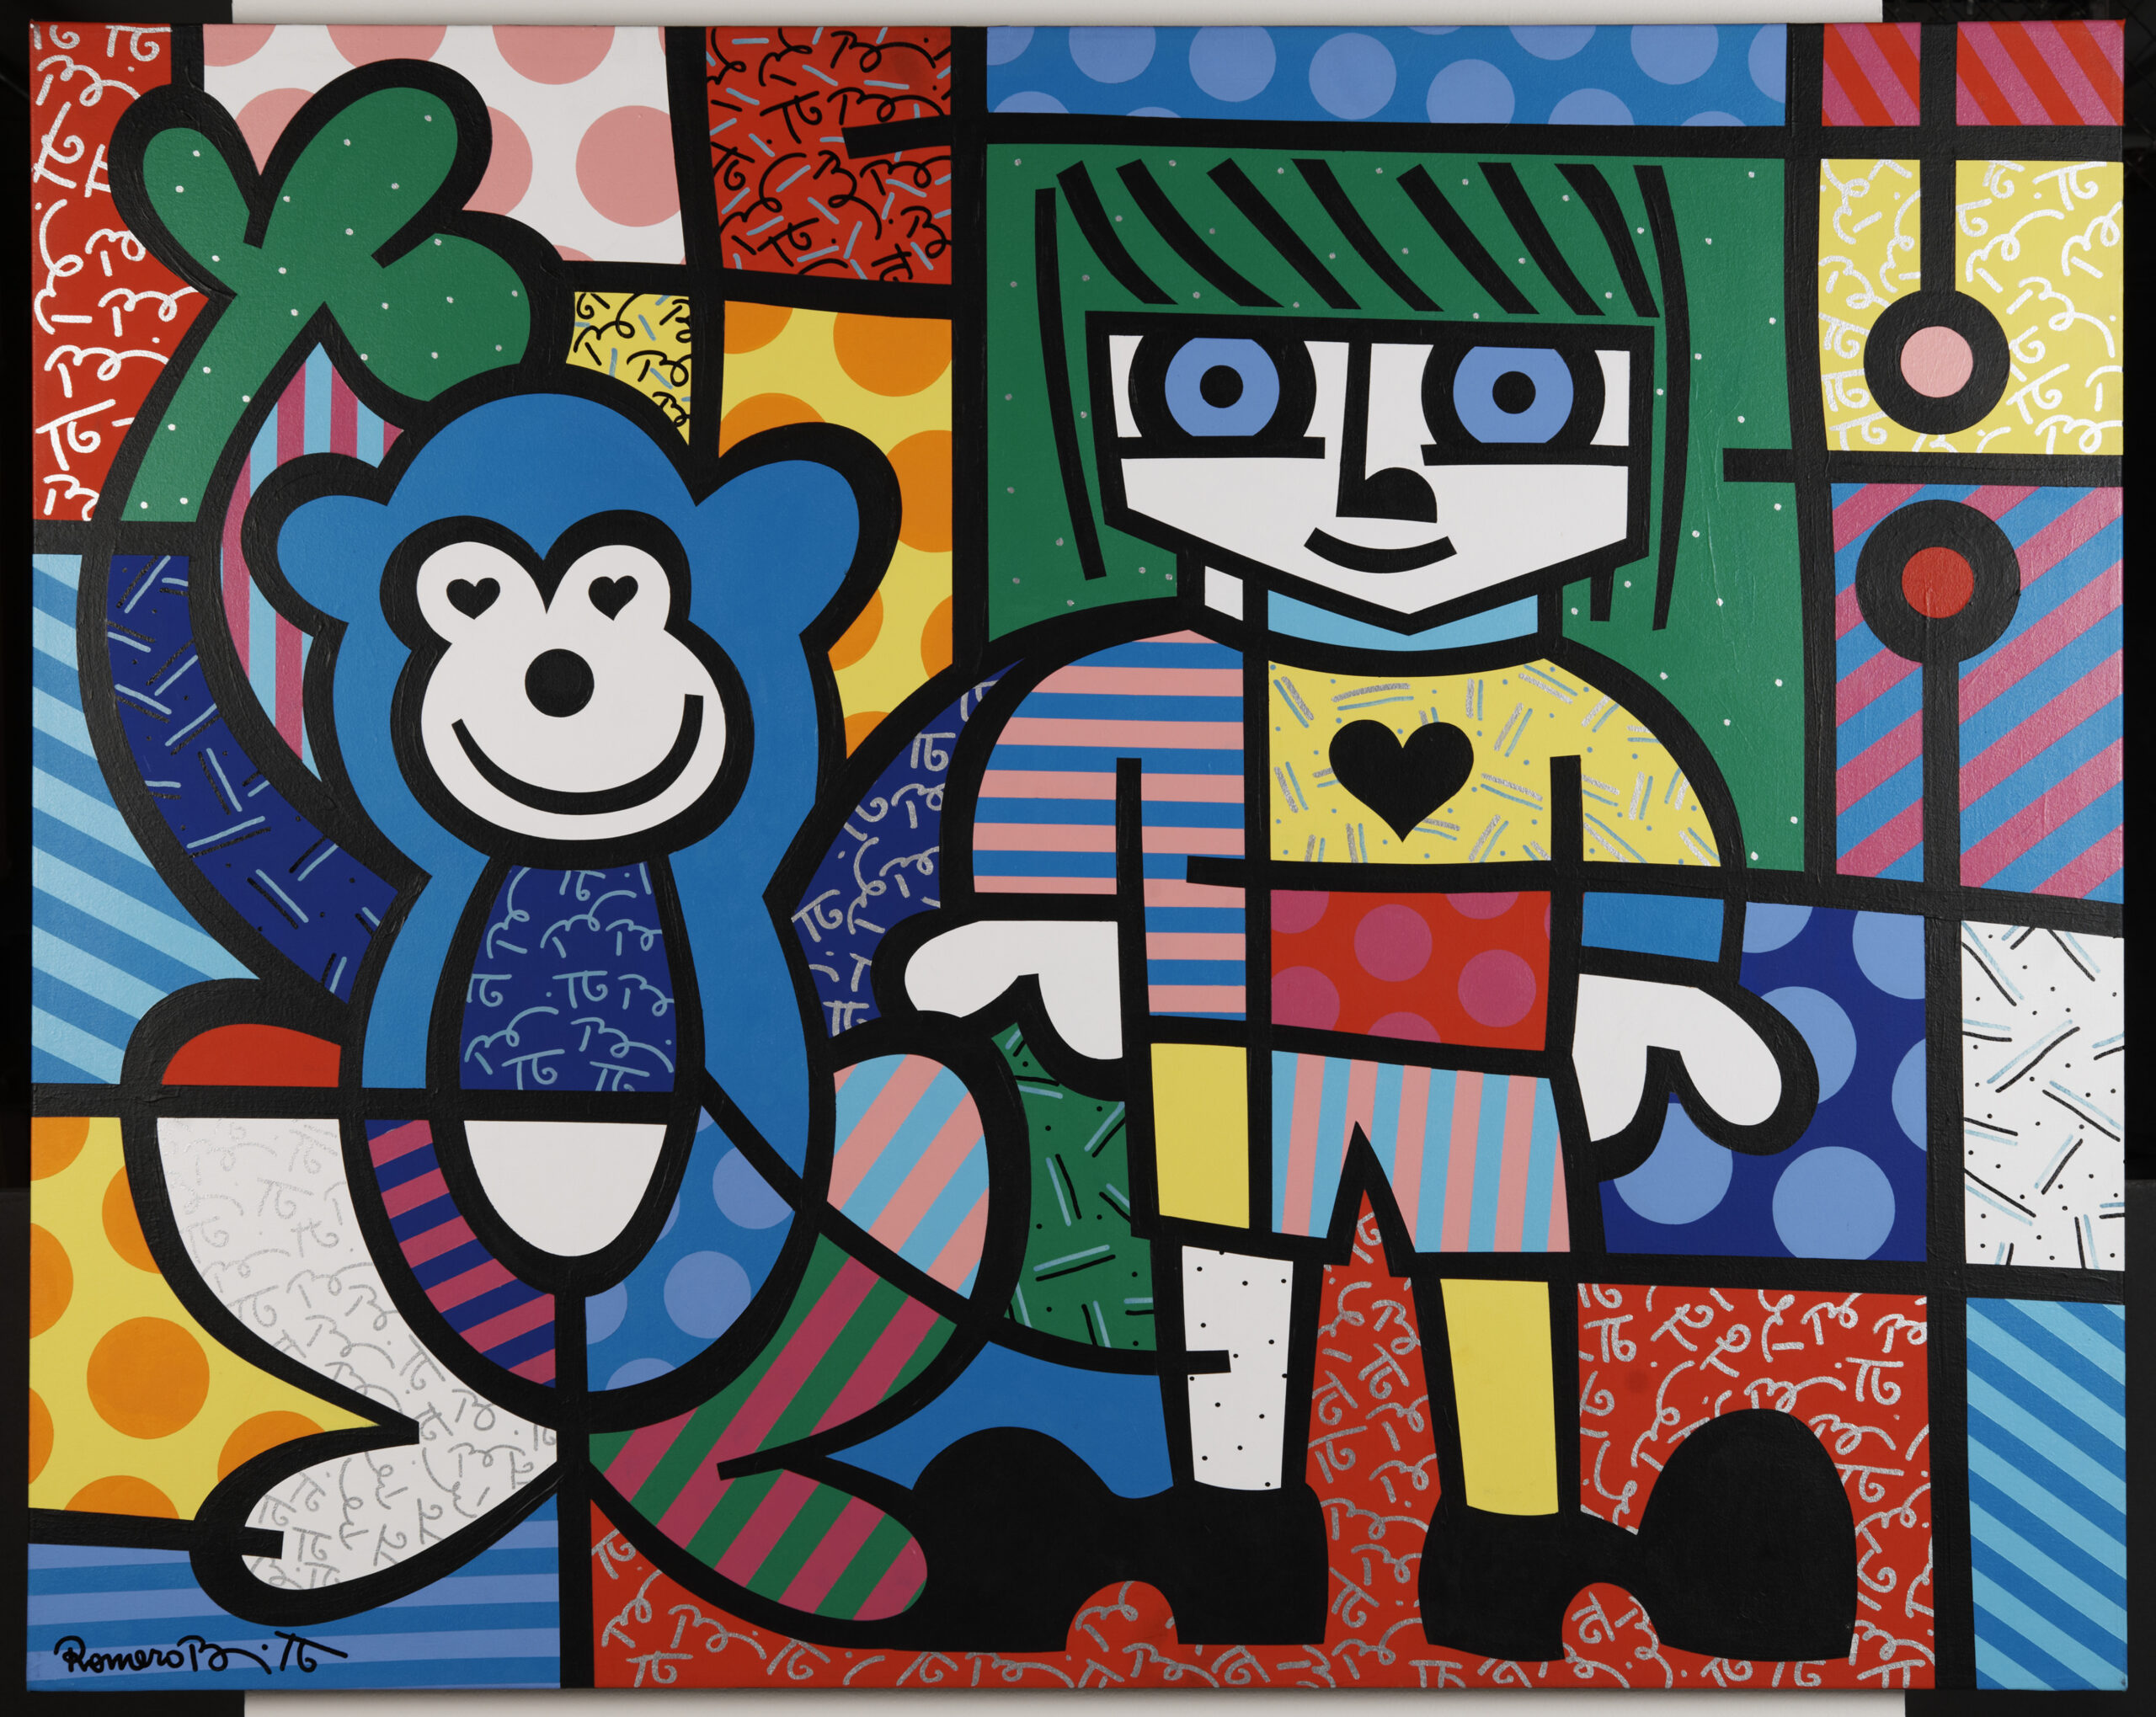 Romero Britto, The Blue Monkey, 1994, oil on canvas. Collection of the Kalamazoo Institute of Arts; Gift of the artist.